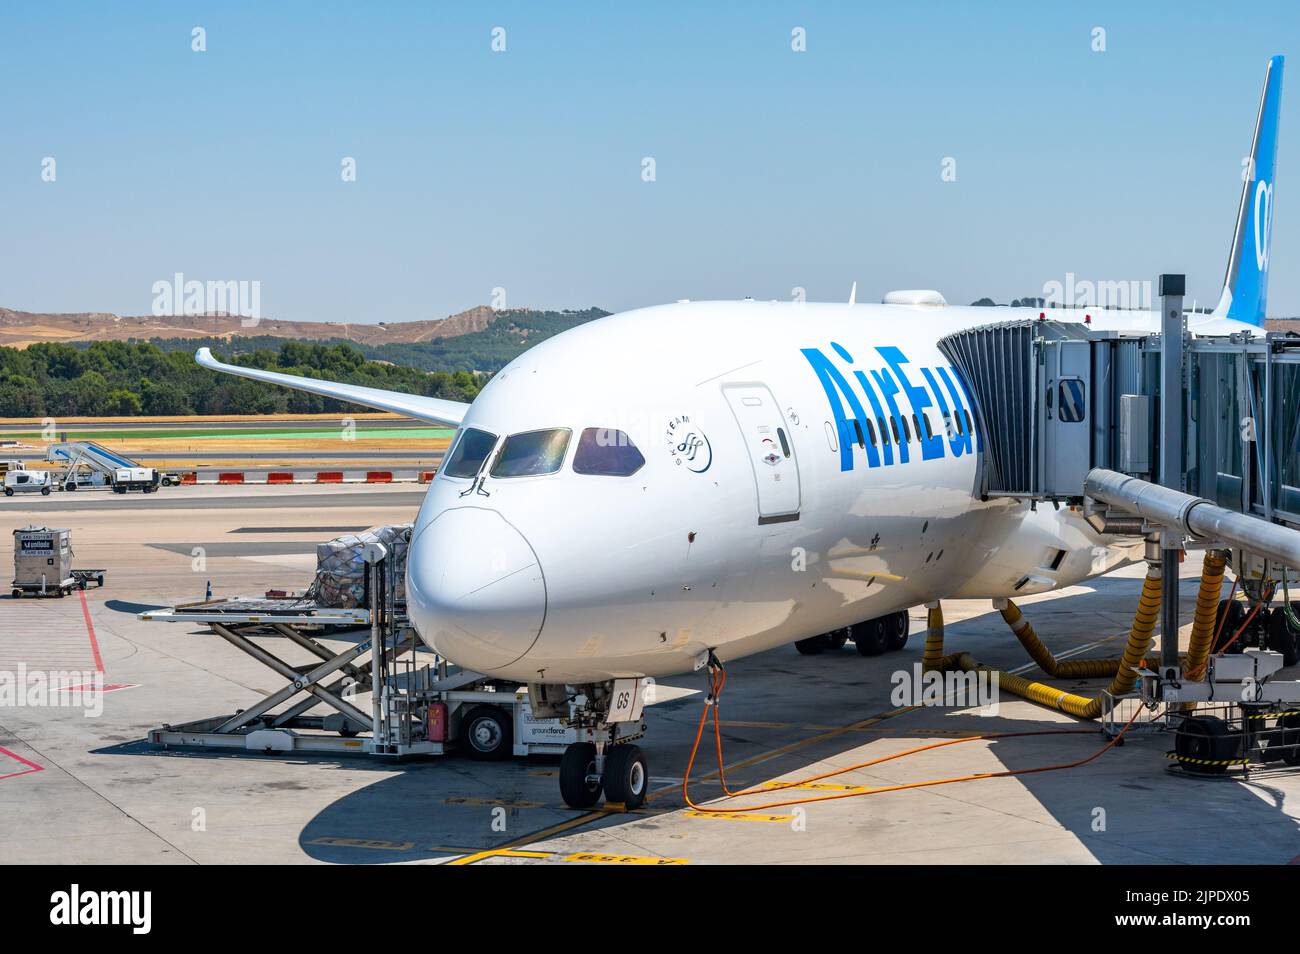 A Passenger Boarding Bridge (PBB) which is also known as an air bridge or jet bridge is attached to an Air Europa plane in a Spanish airport Stock Photo